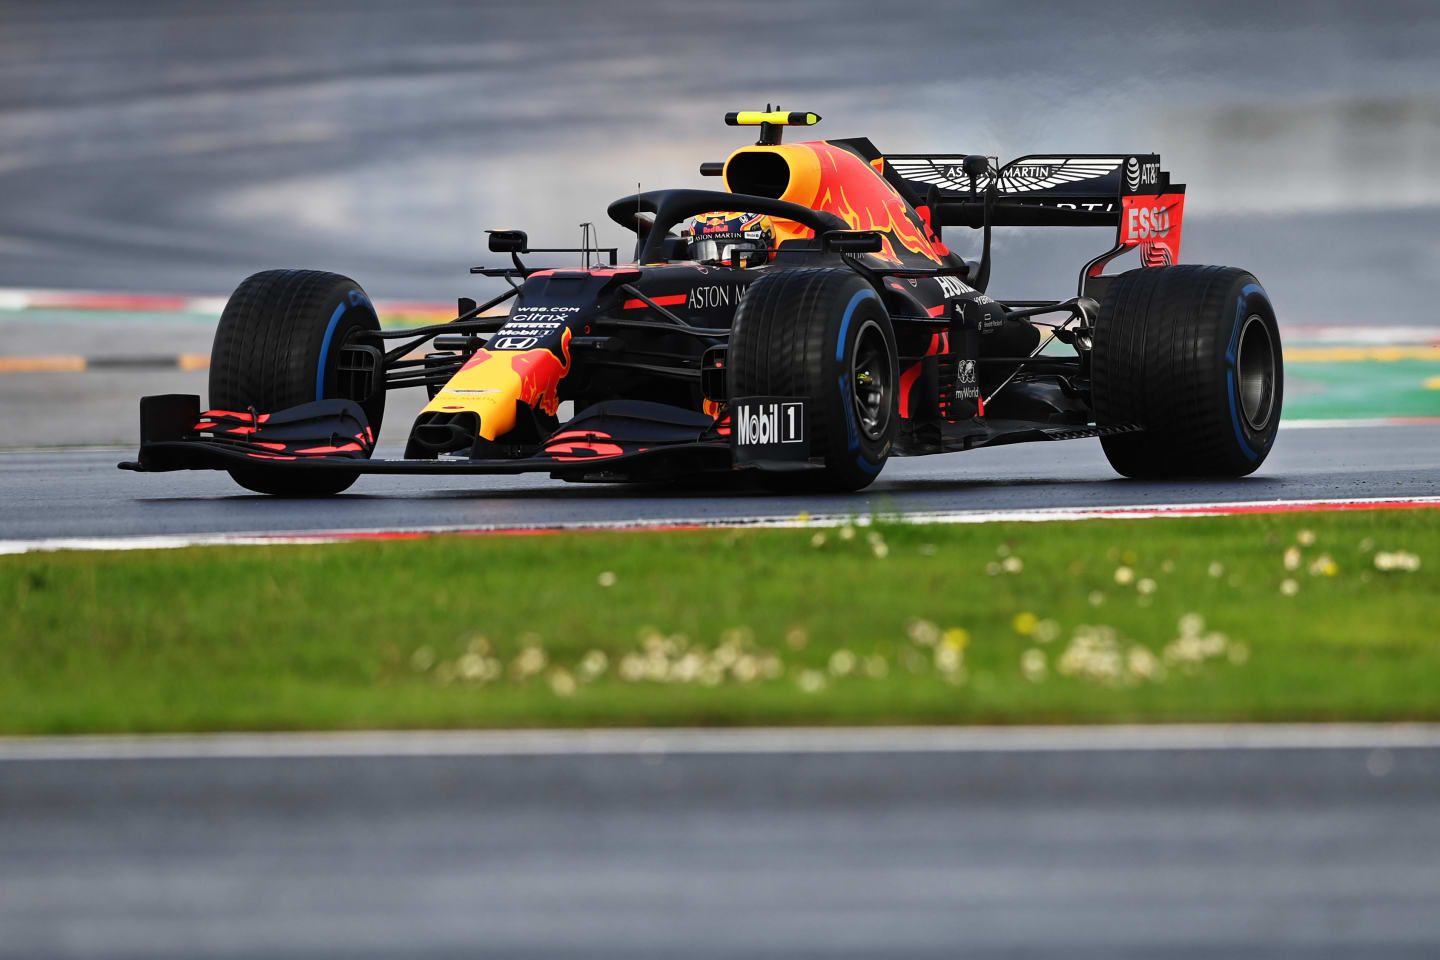 ISTANBUL, TURKEY - NOVEMBER 15: Alexander Albon of Thailand driving the (23) Aston Martin Red Bull Racing RB16 on track during the F1 Grand Prix of Turkey at Intercity Istanbul Park on November 15, 2020 in Istanbul, Turkey. (Photo by Ozan Kose - Pool/Getty Images)